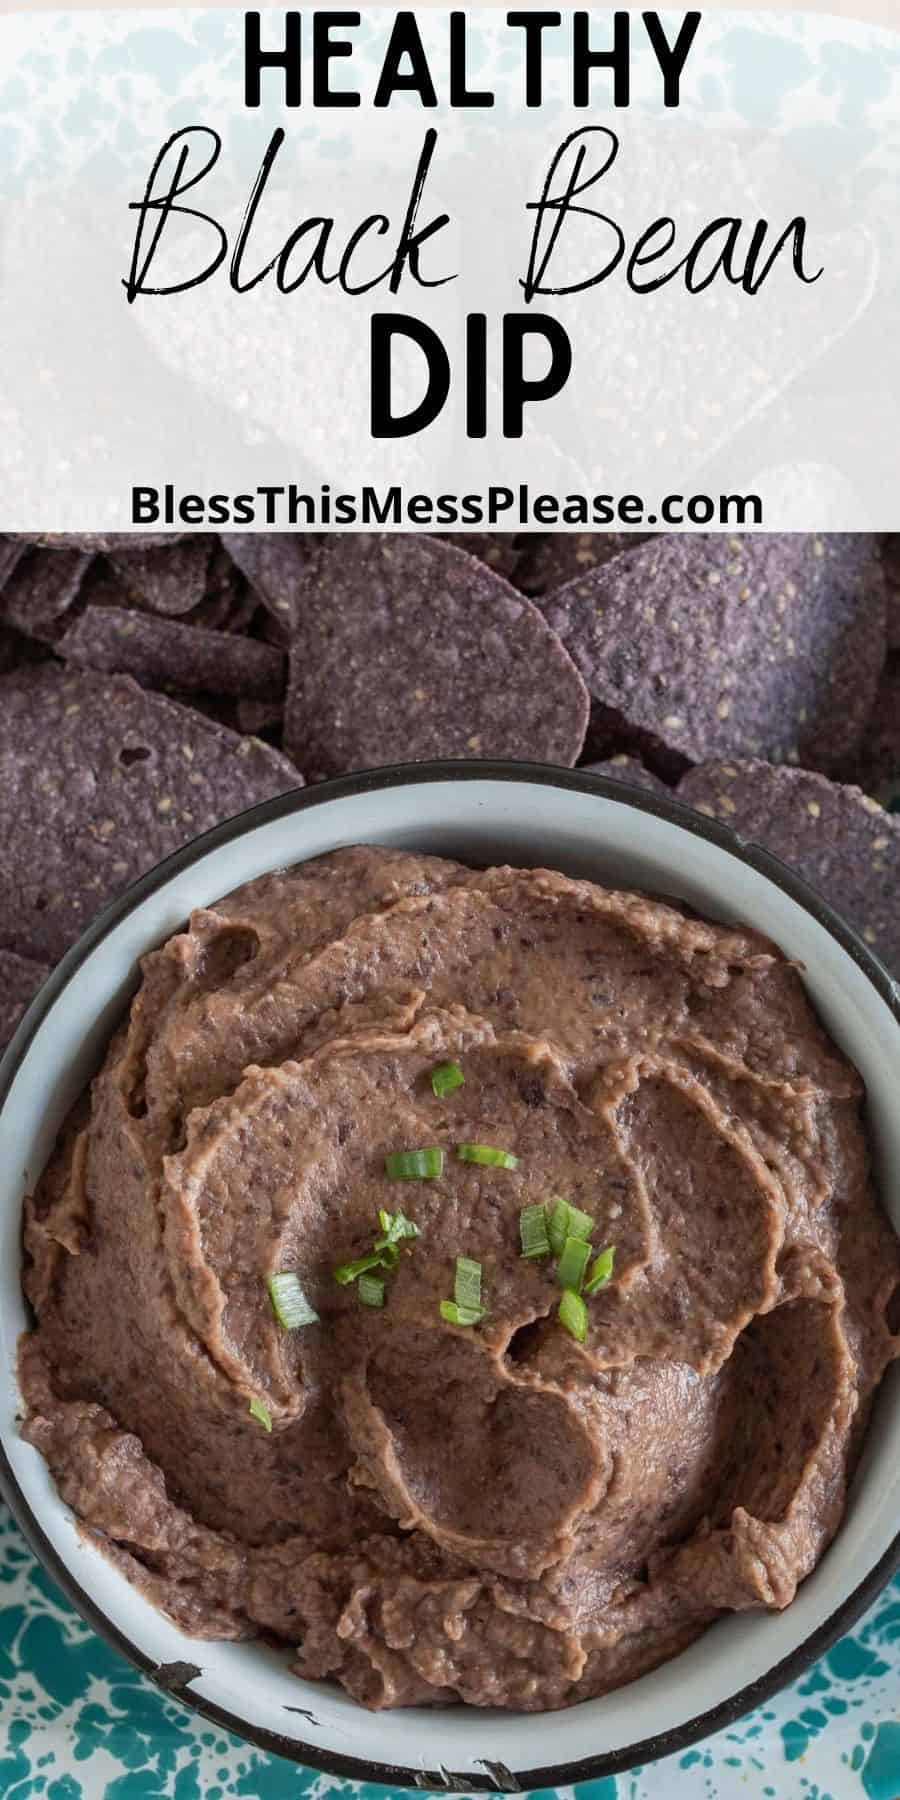 top view of a bowl of black bean dip next to a tray of tortilla chips with the words "healthy black bean dip"